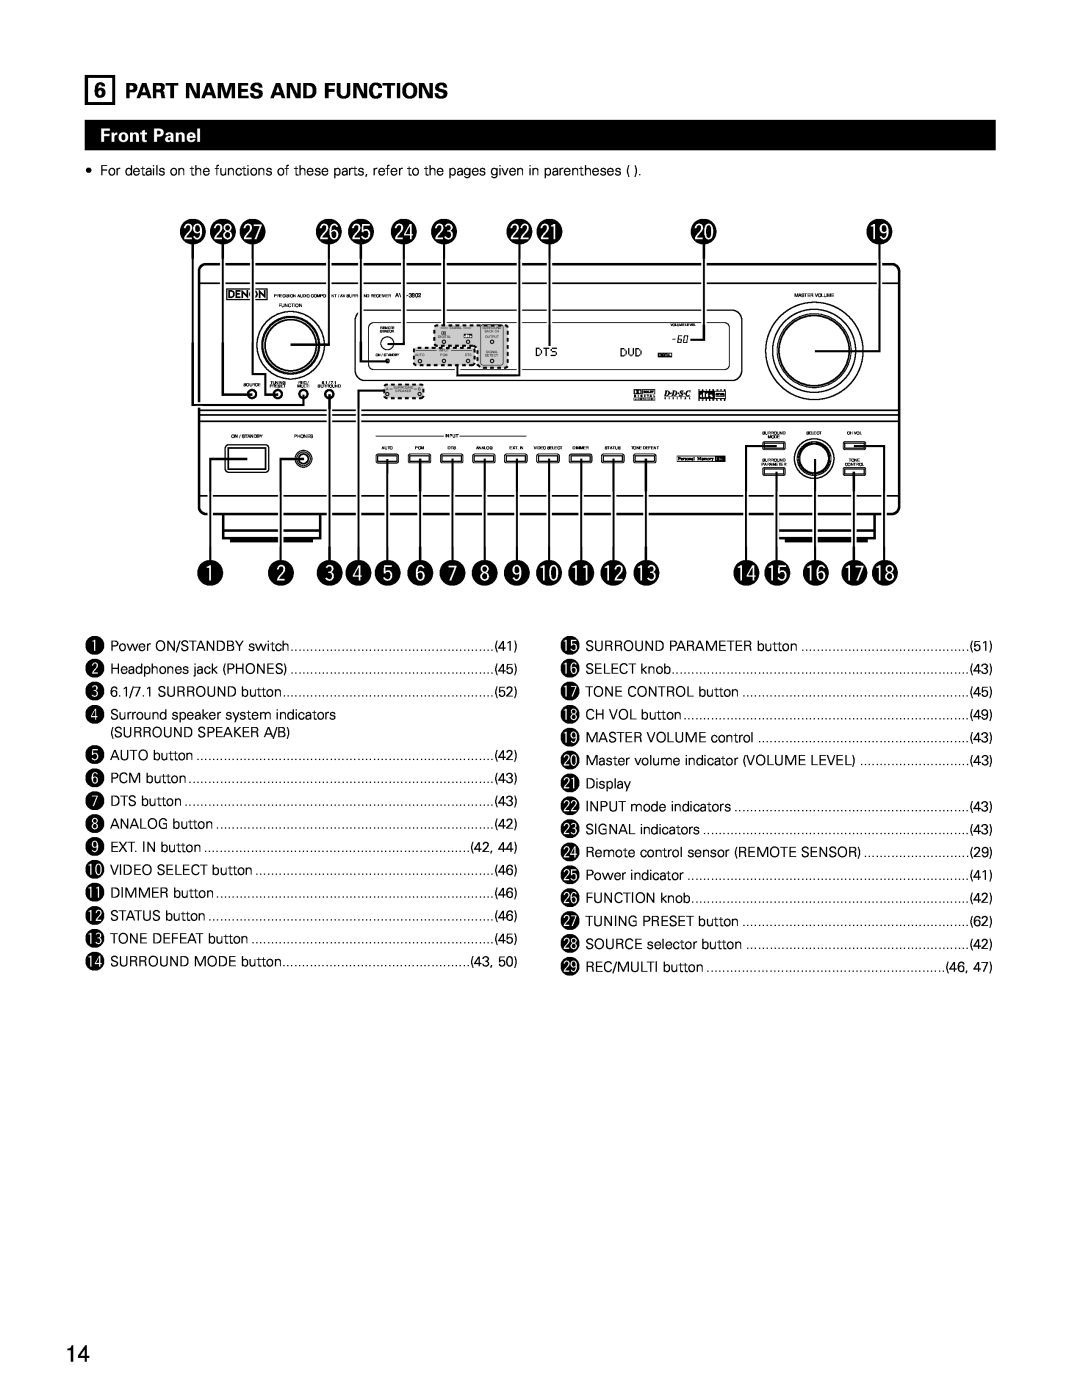 Denon AVR-3802 manual Part Names And Functions, @9@8@7, Front Panel, @6@5 @4@3, @2@1, w er t y u i o !0!1!2!3, 4!5!6!7!8 